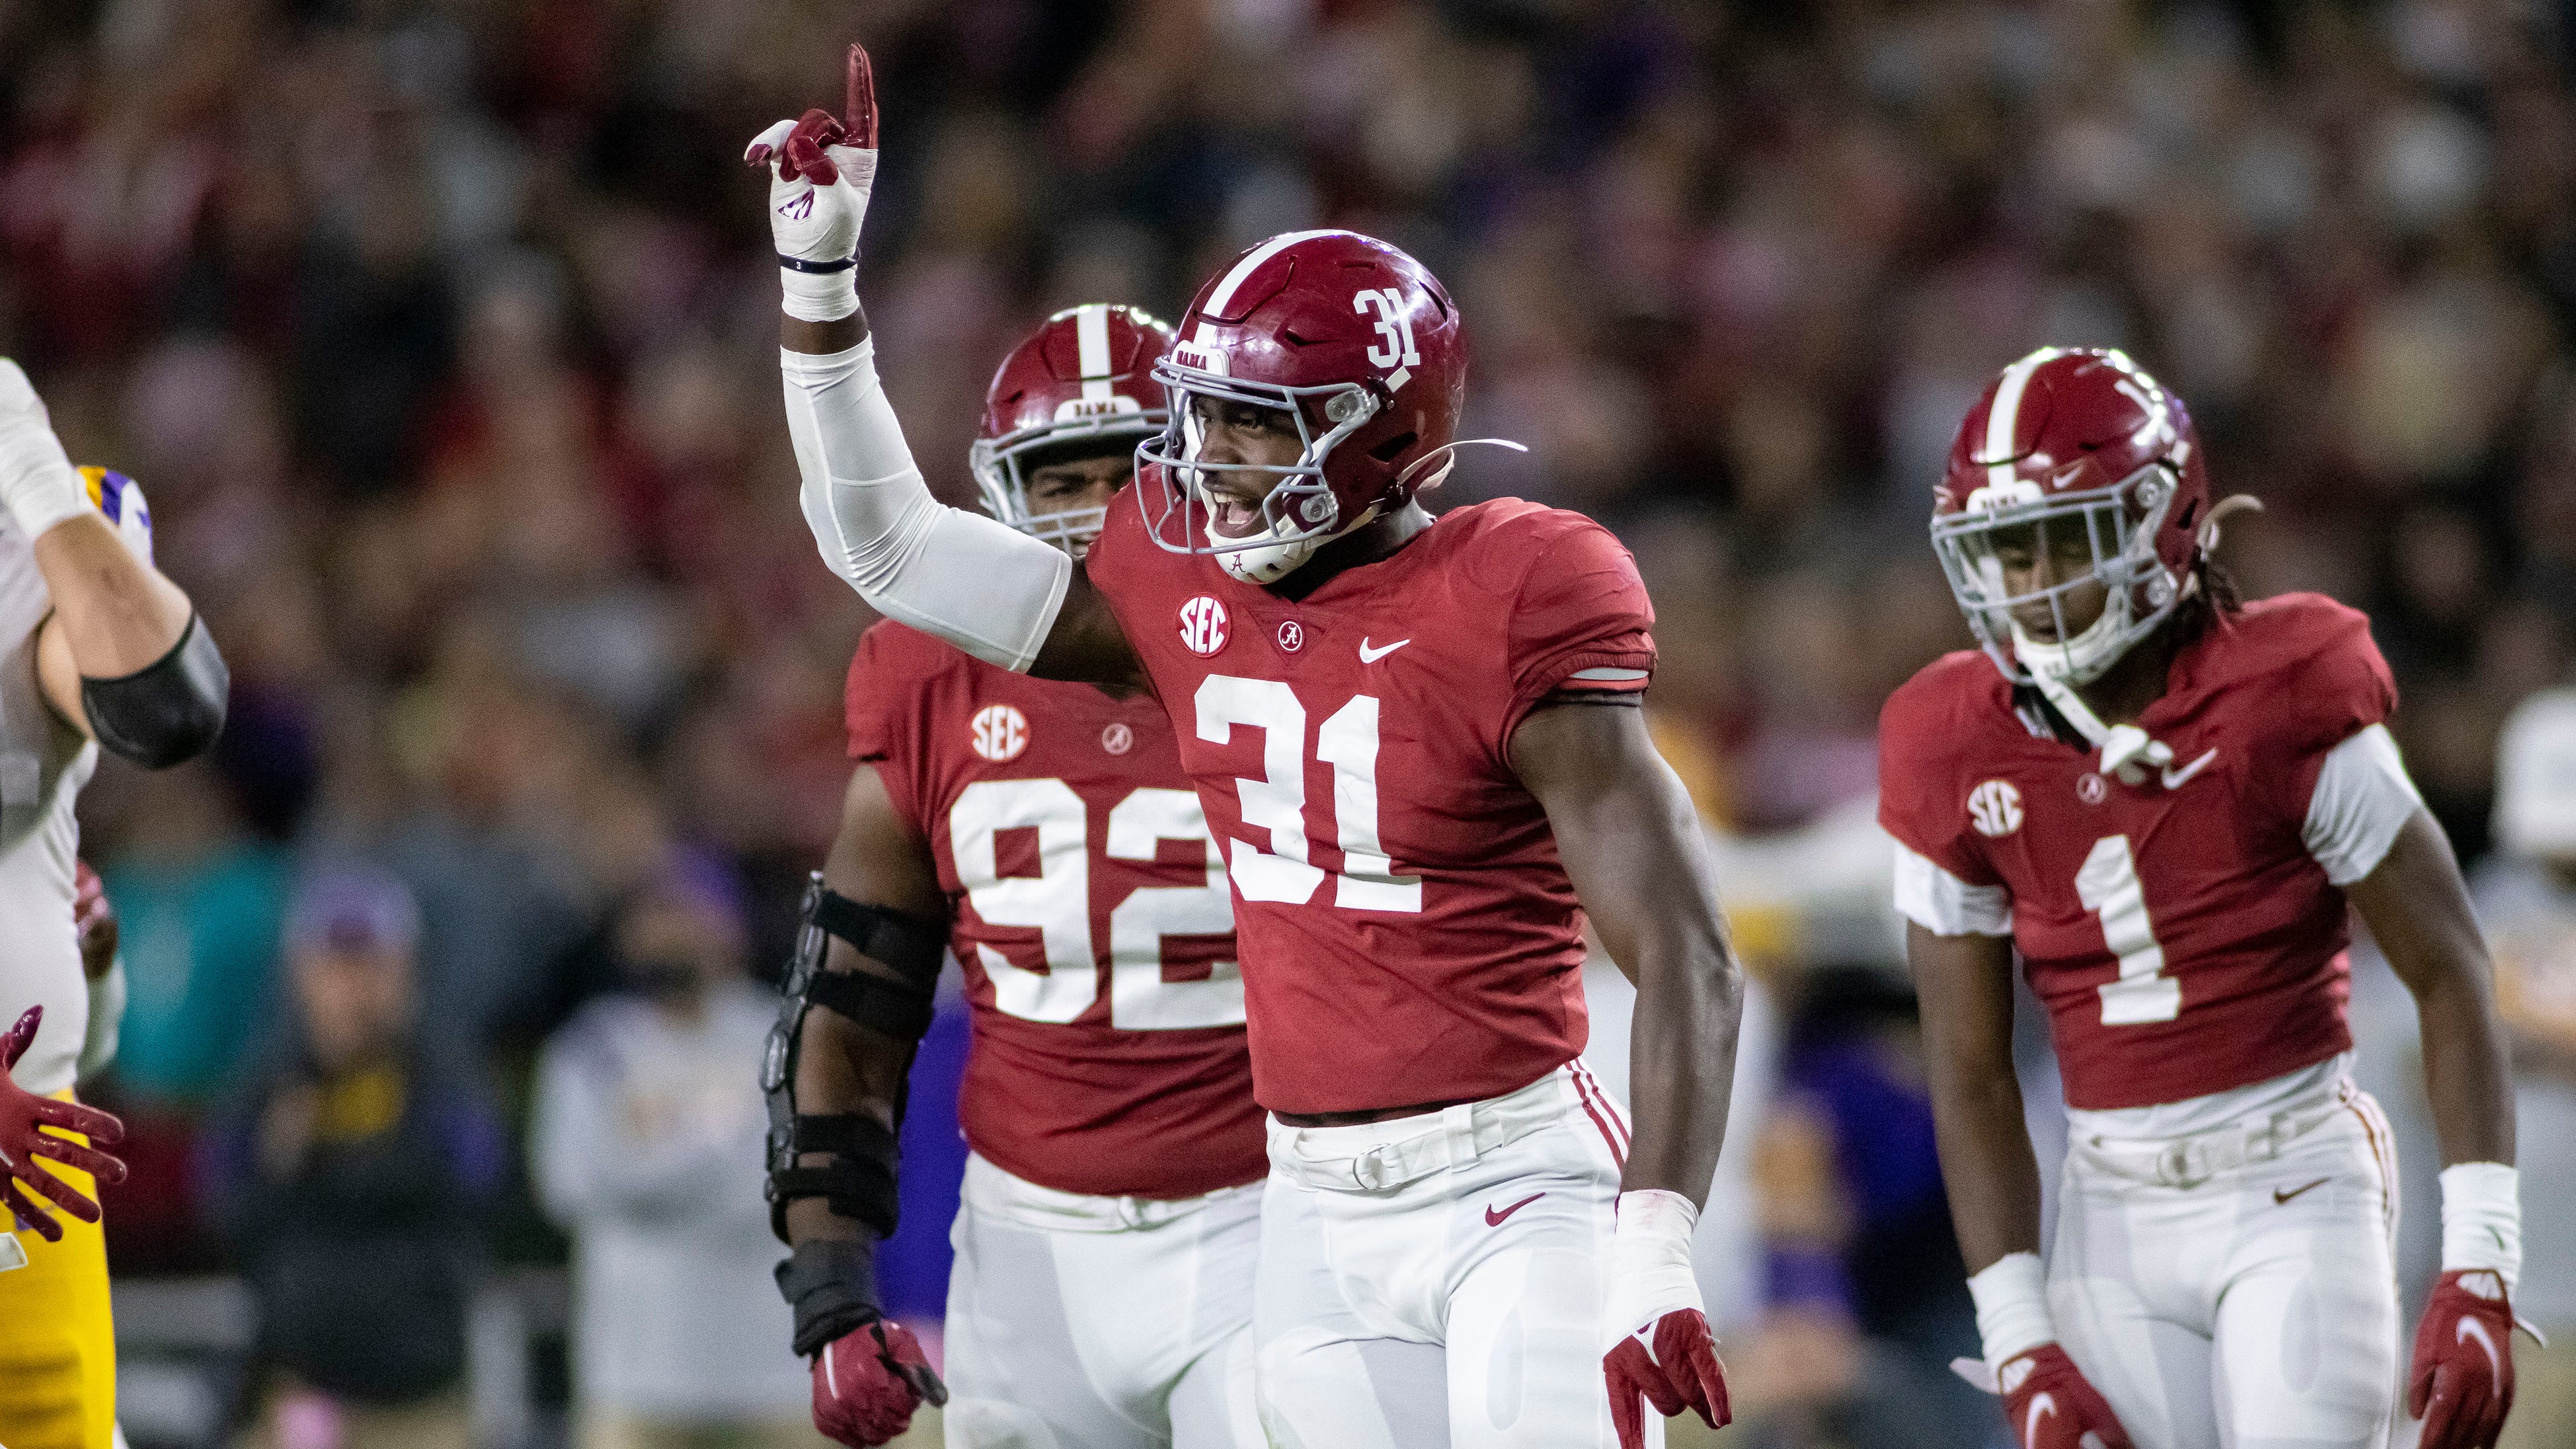 Alabama linebacker Will Anderson Jr. (31) celebrates a defensive stop against LSU during the first half of an NCAA college football game, Saturday, Nov. 6, 2021, in Tuscaloosa, Ala.